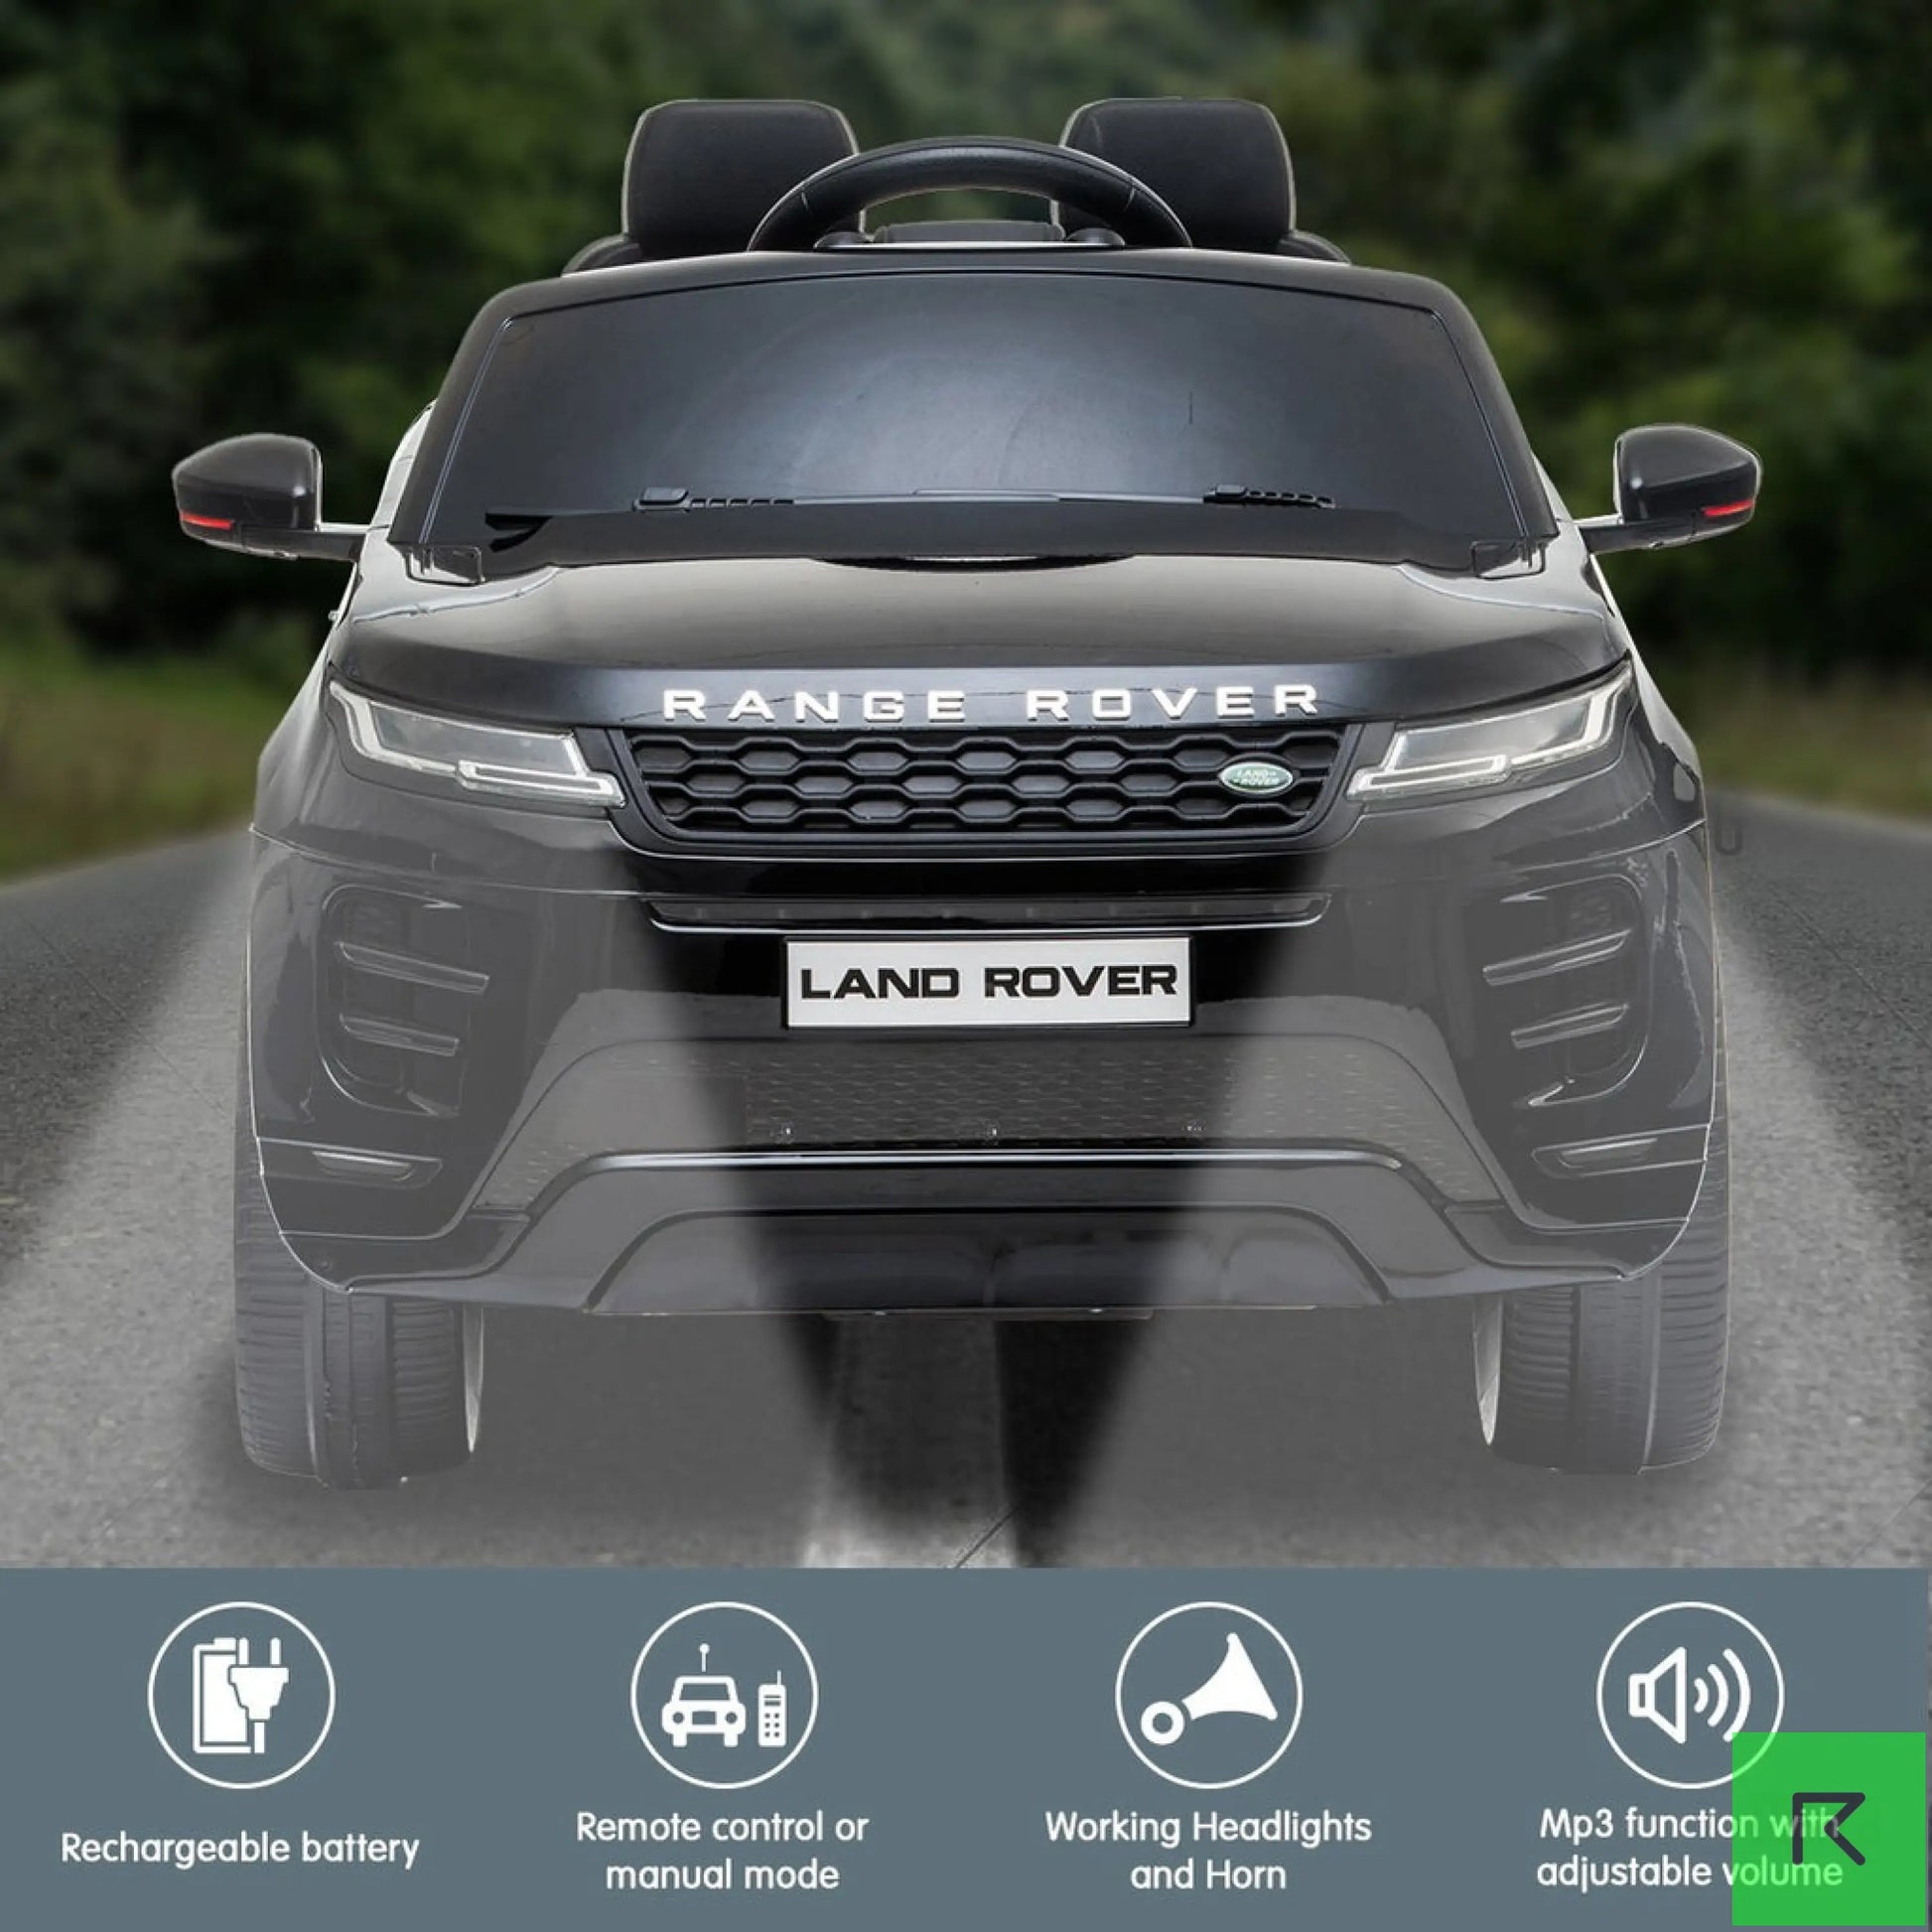 LAND ROVER BLACK kids ride on electric car